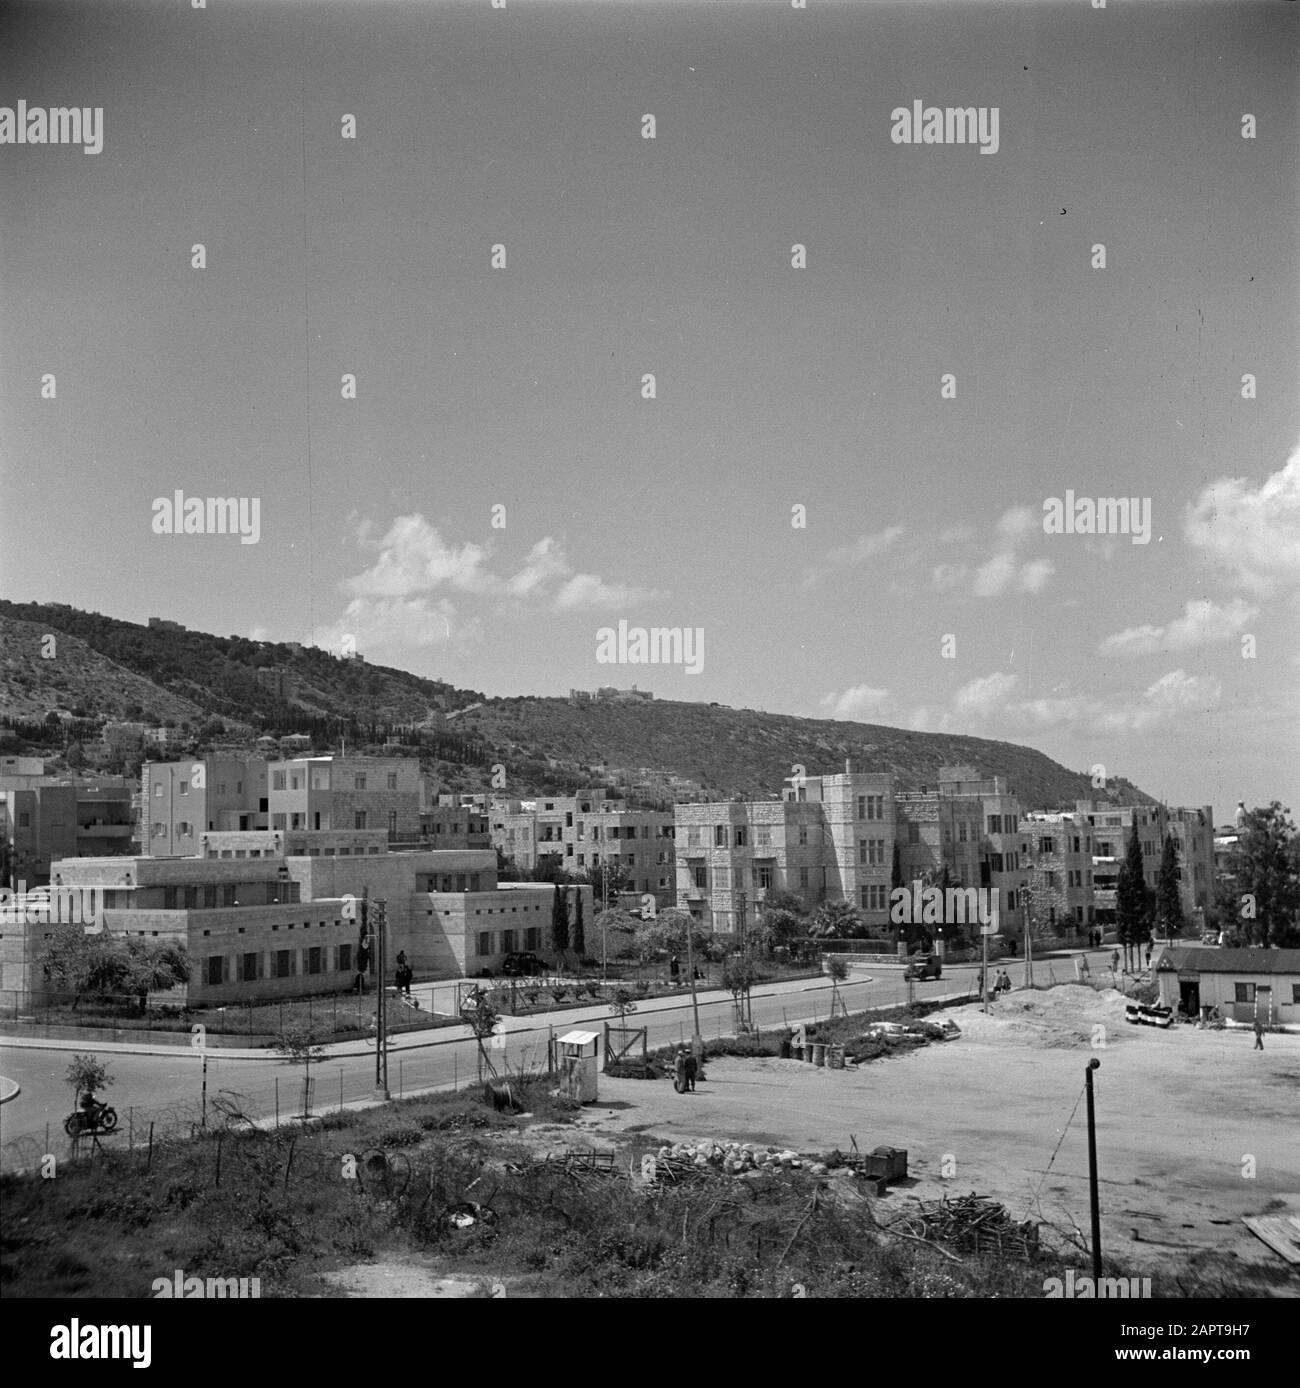 Israel 1948-1949: Haifa  Buildings including a hotel (r), with in the foreground an undeveloped land Date: 1948 Location: Haifa, Israel Keywords: apartment blocks, hotels, street images Stock Photo